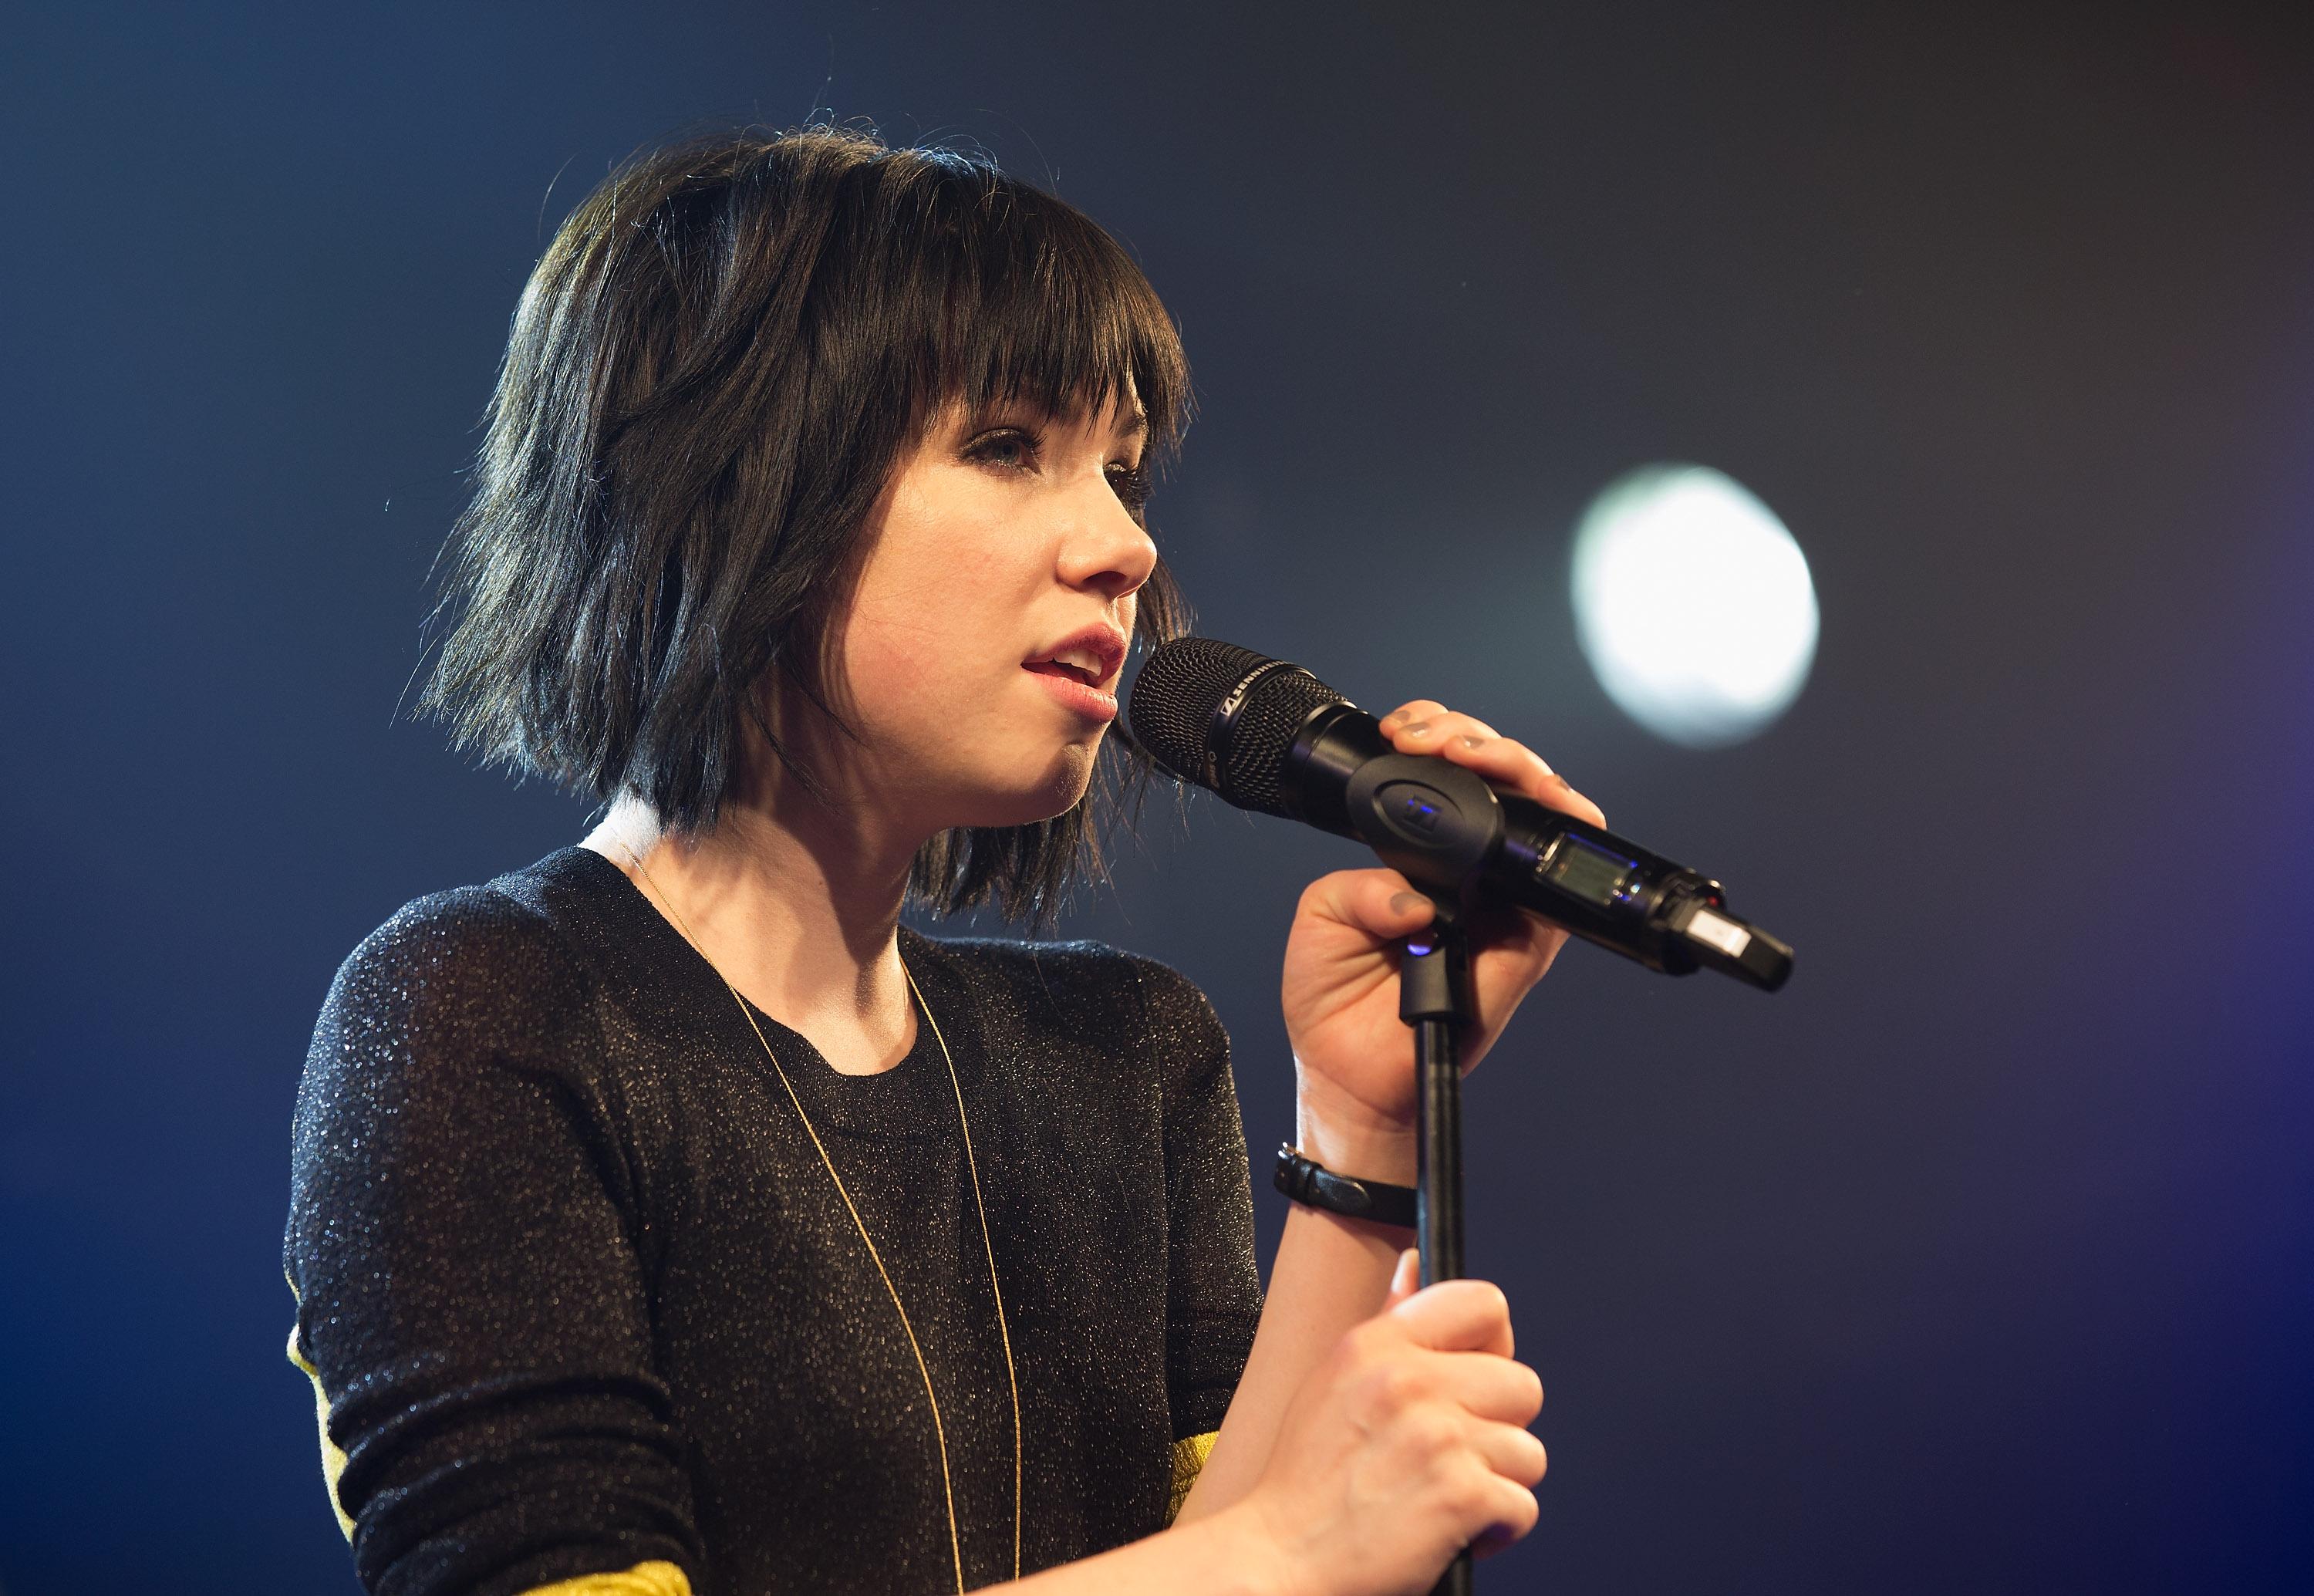 Carly Rae Jepsen Shares 'Emotion' Release Date, Preps New Single